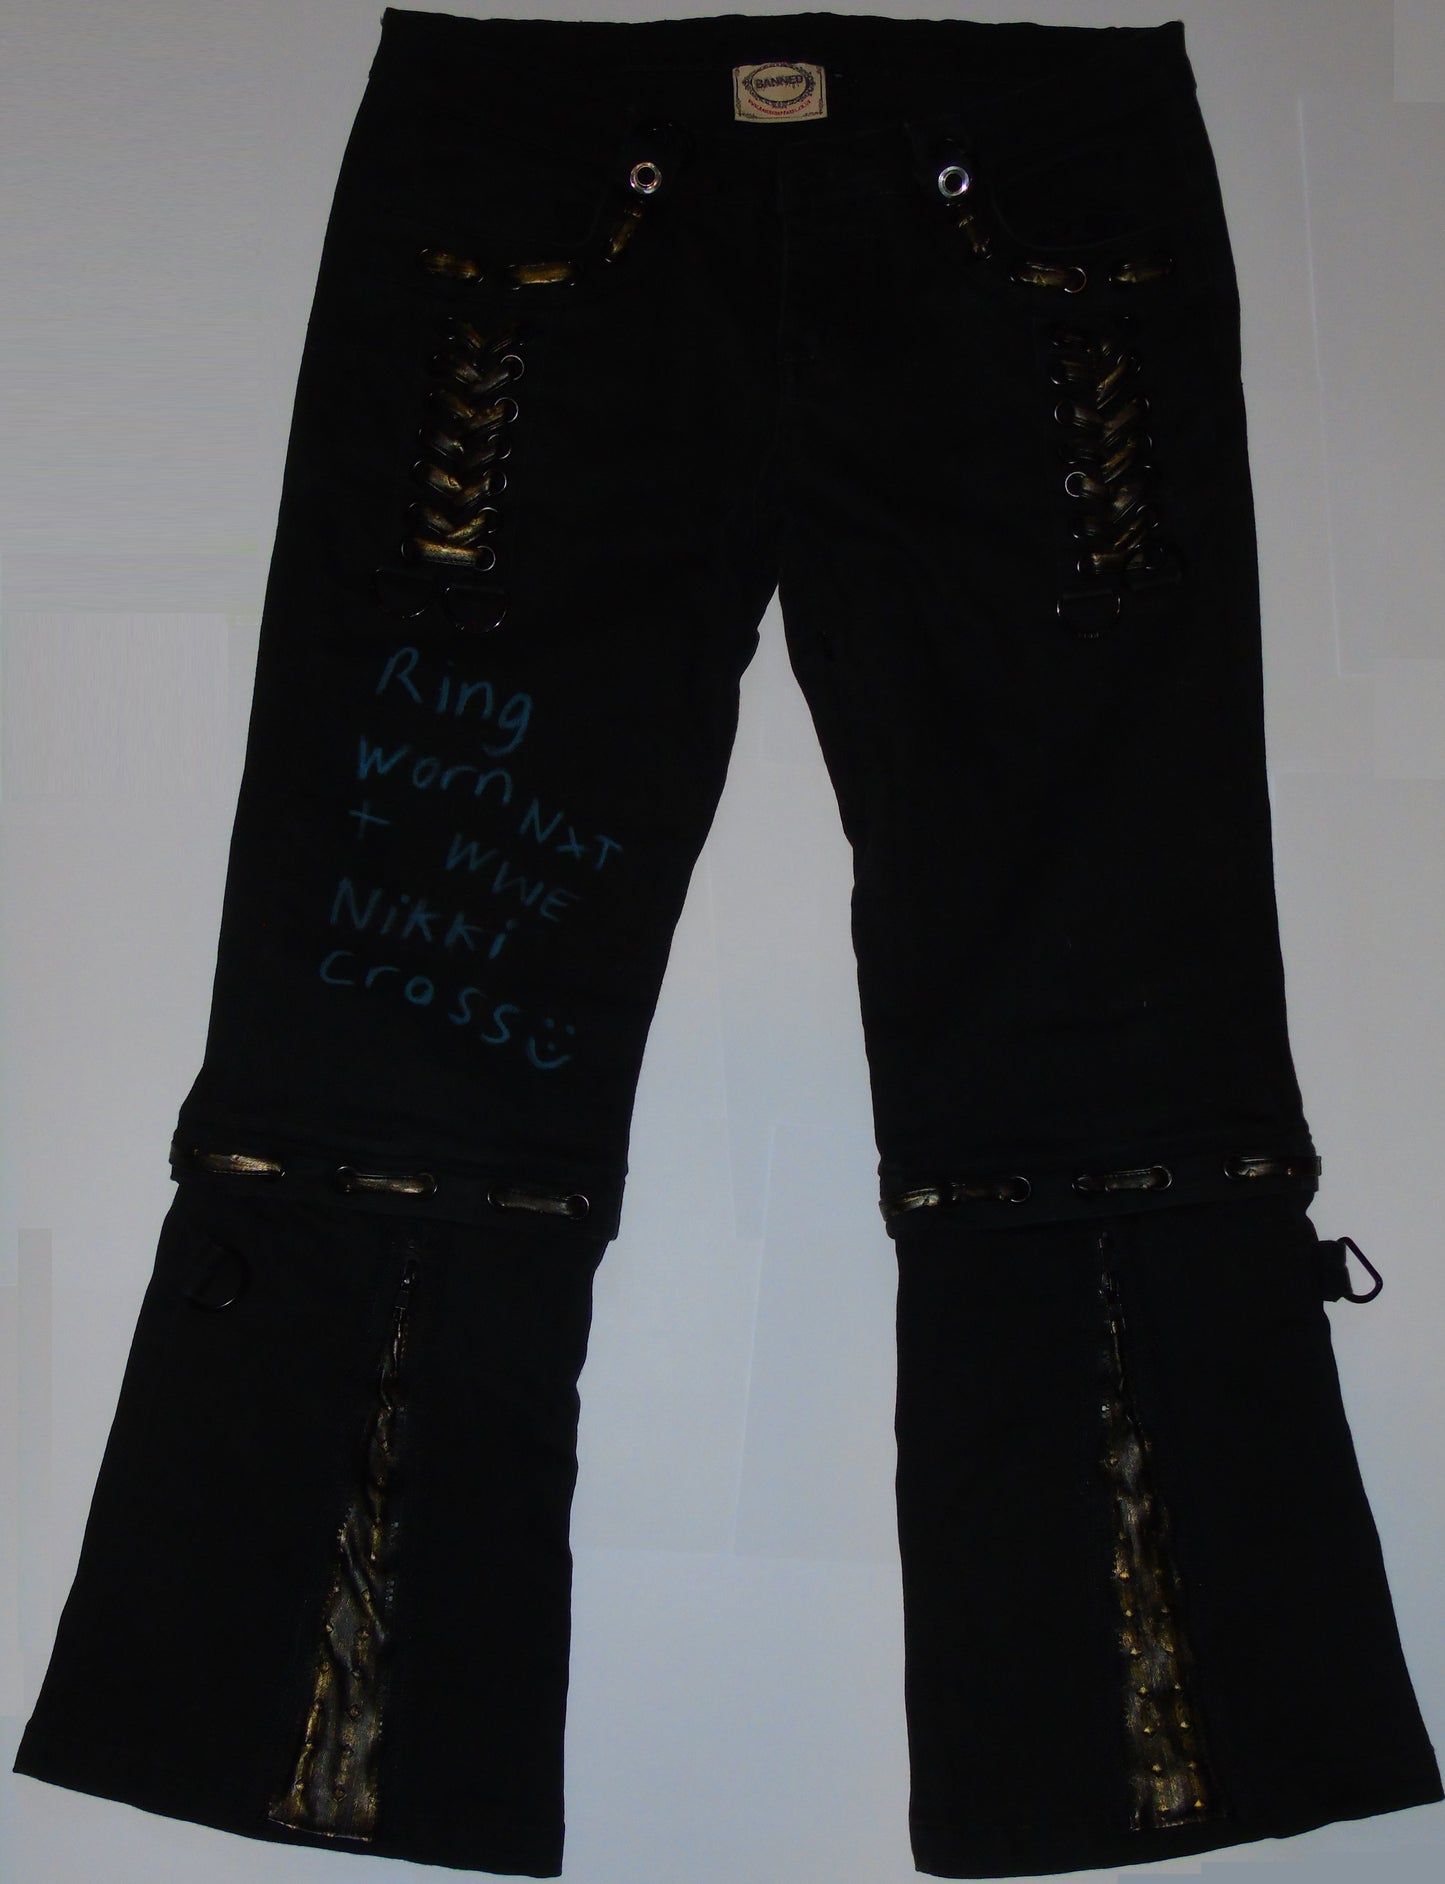 *TV footage proof* Ring Worn & Signed Nikki Cross NXT WWE Combat Trousers